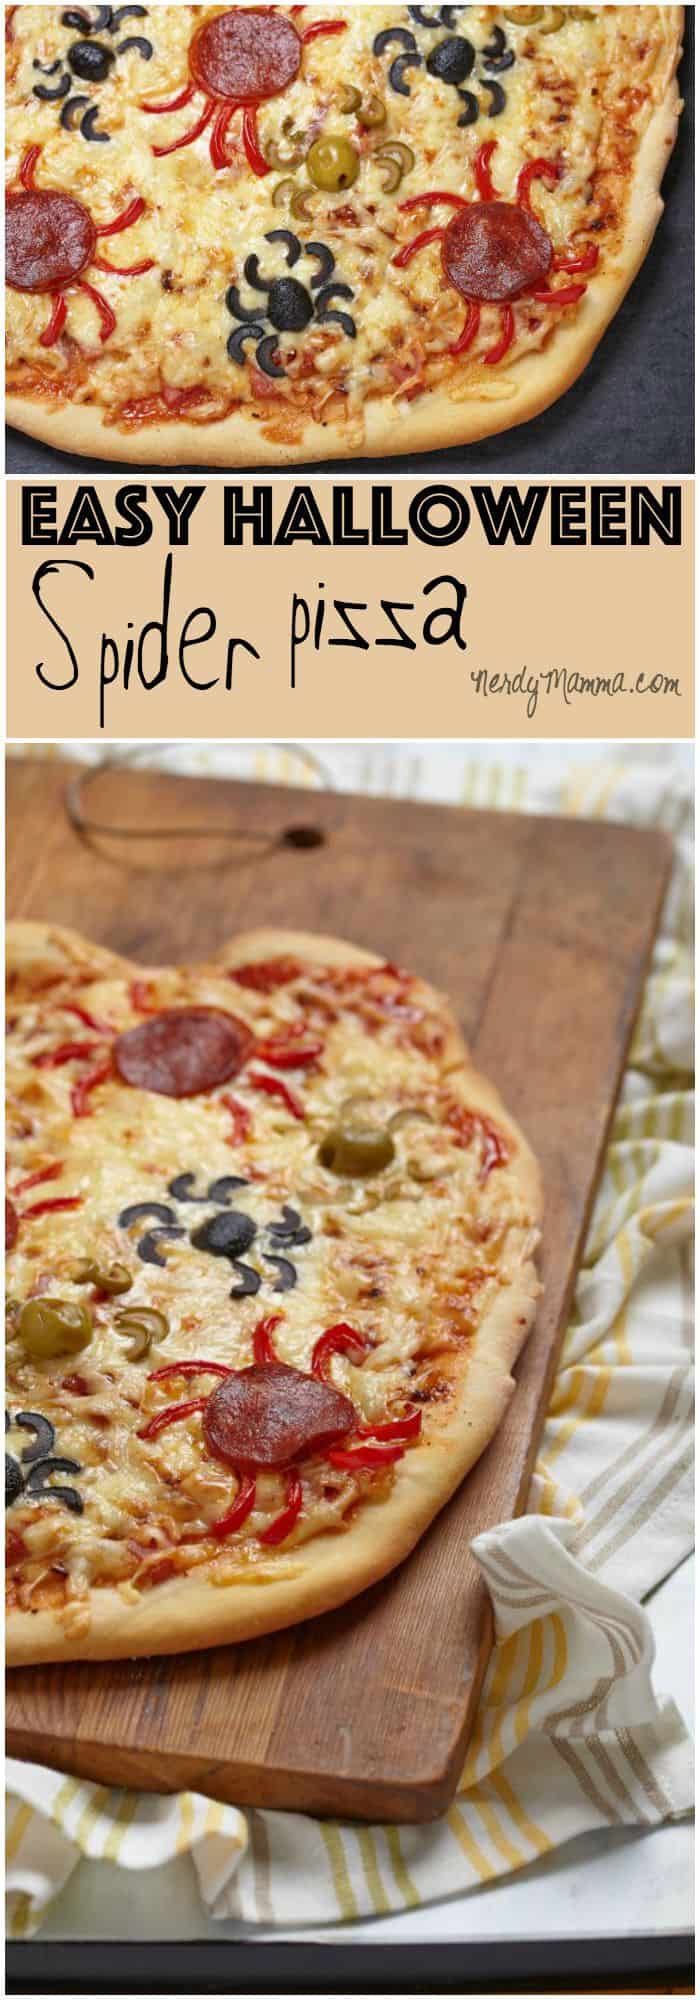 My kids thought this halloween pizza with spiders was so cool. And I loved how easy it was!